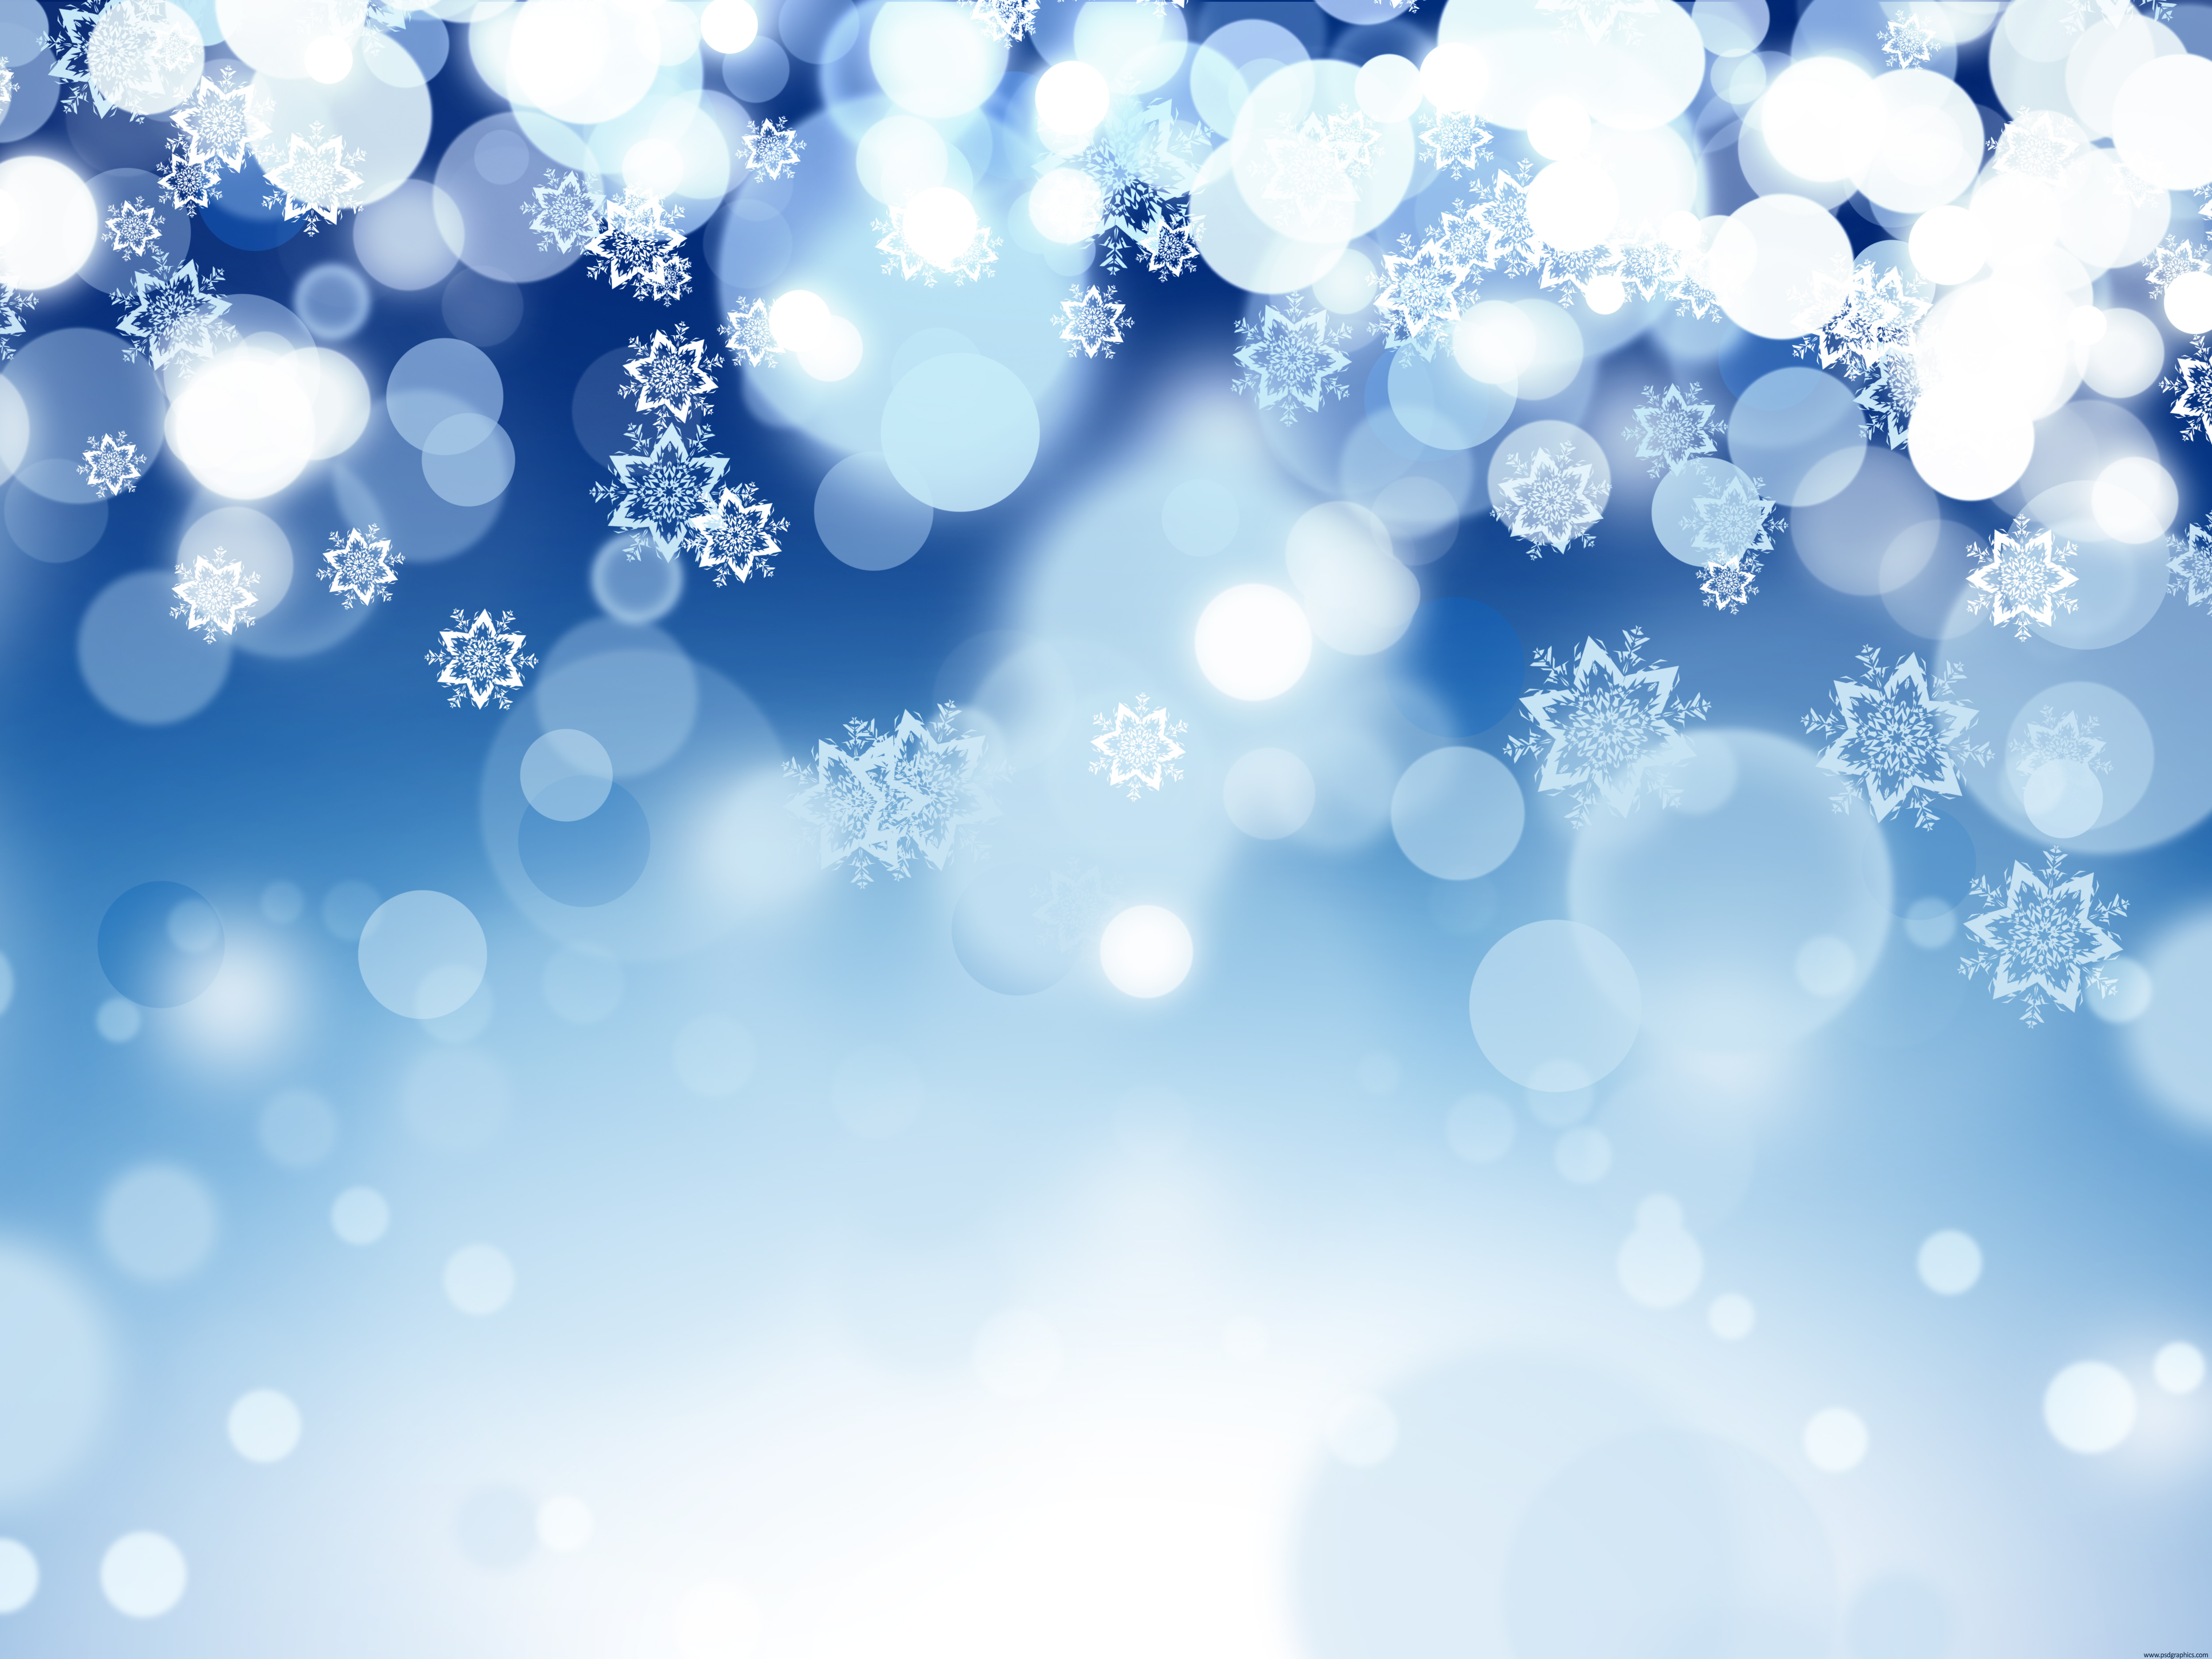 abstract blue snow holiday photos background 